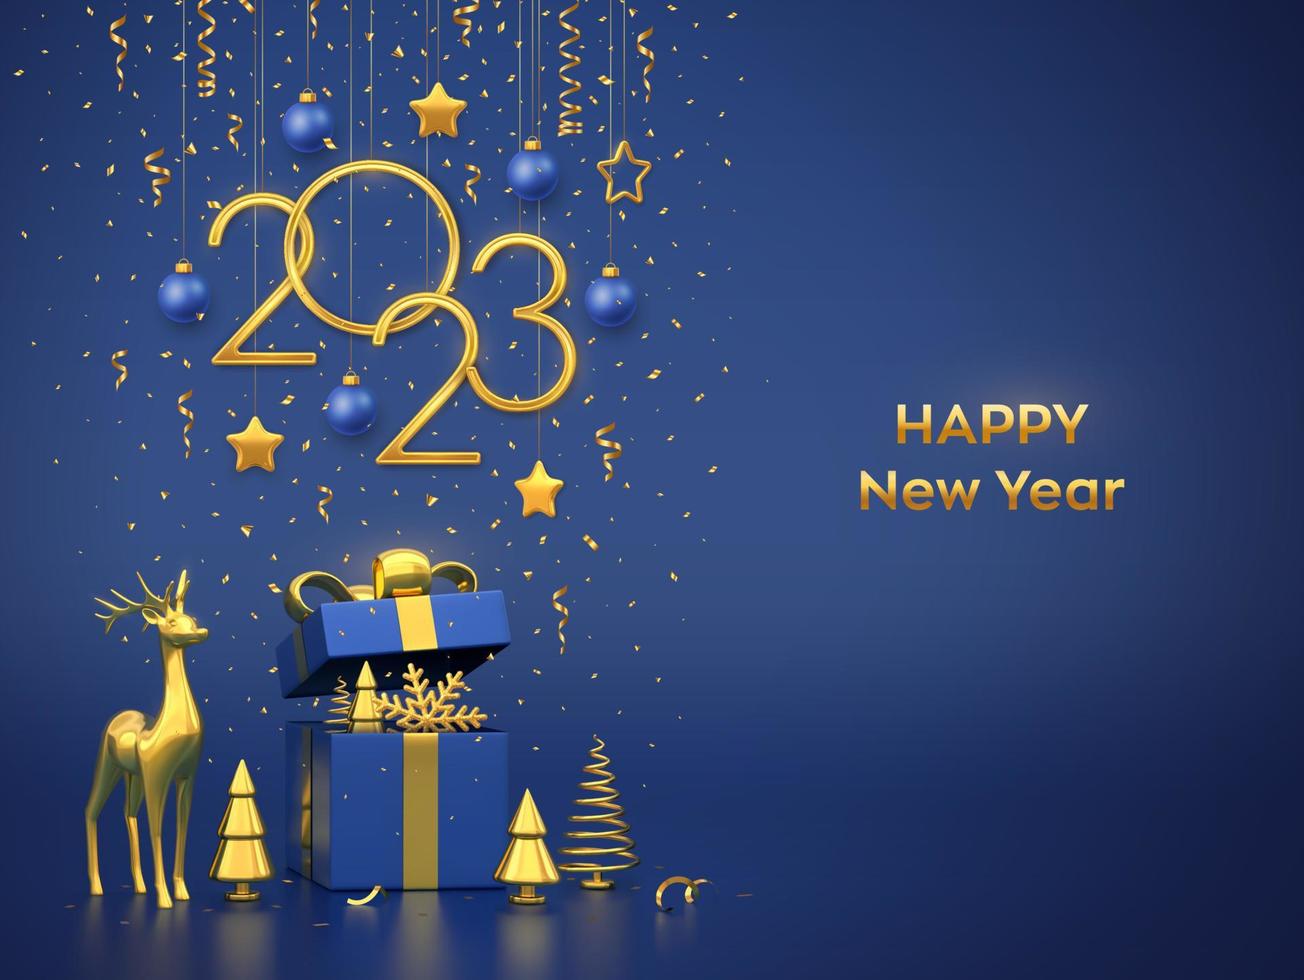 Happy New 2023 Year. Hanging golden metallic numbers 2023 with stars, snowflake, balls on blue background. Open gift box, gold deer and golden metallic pine or fir, spruce trees. Vector illustration.